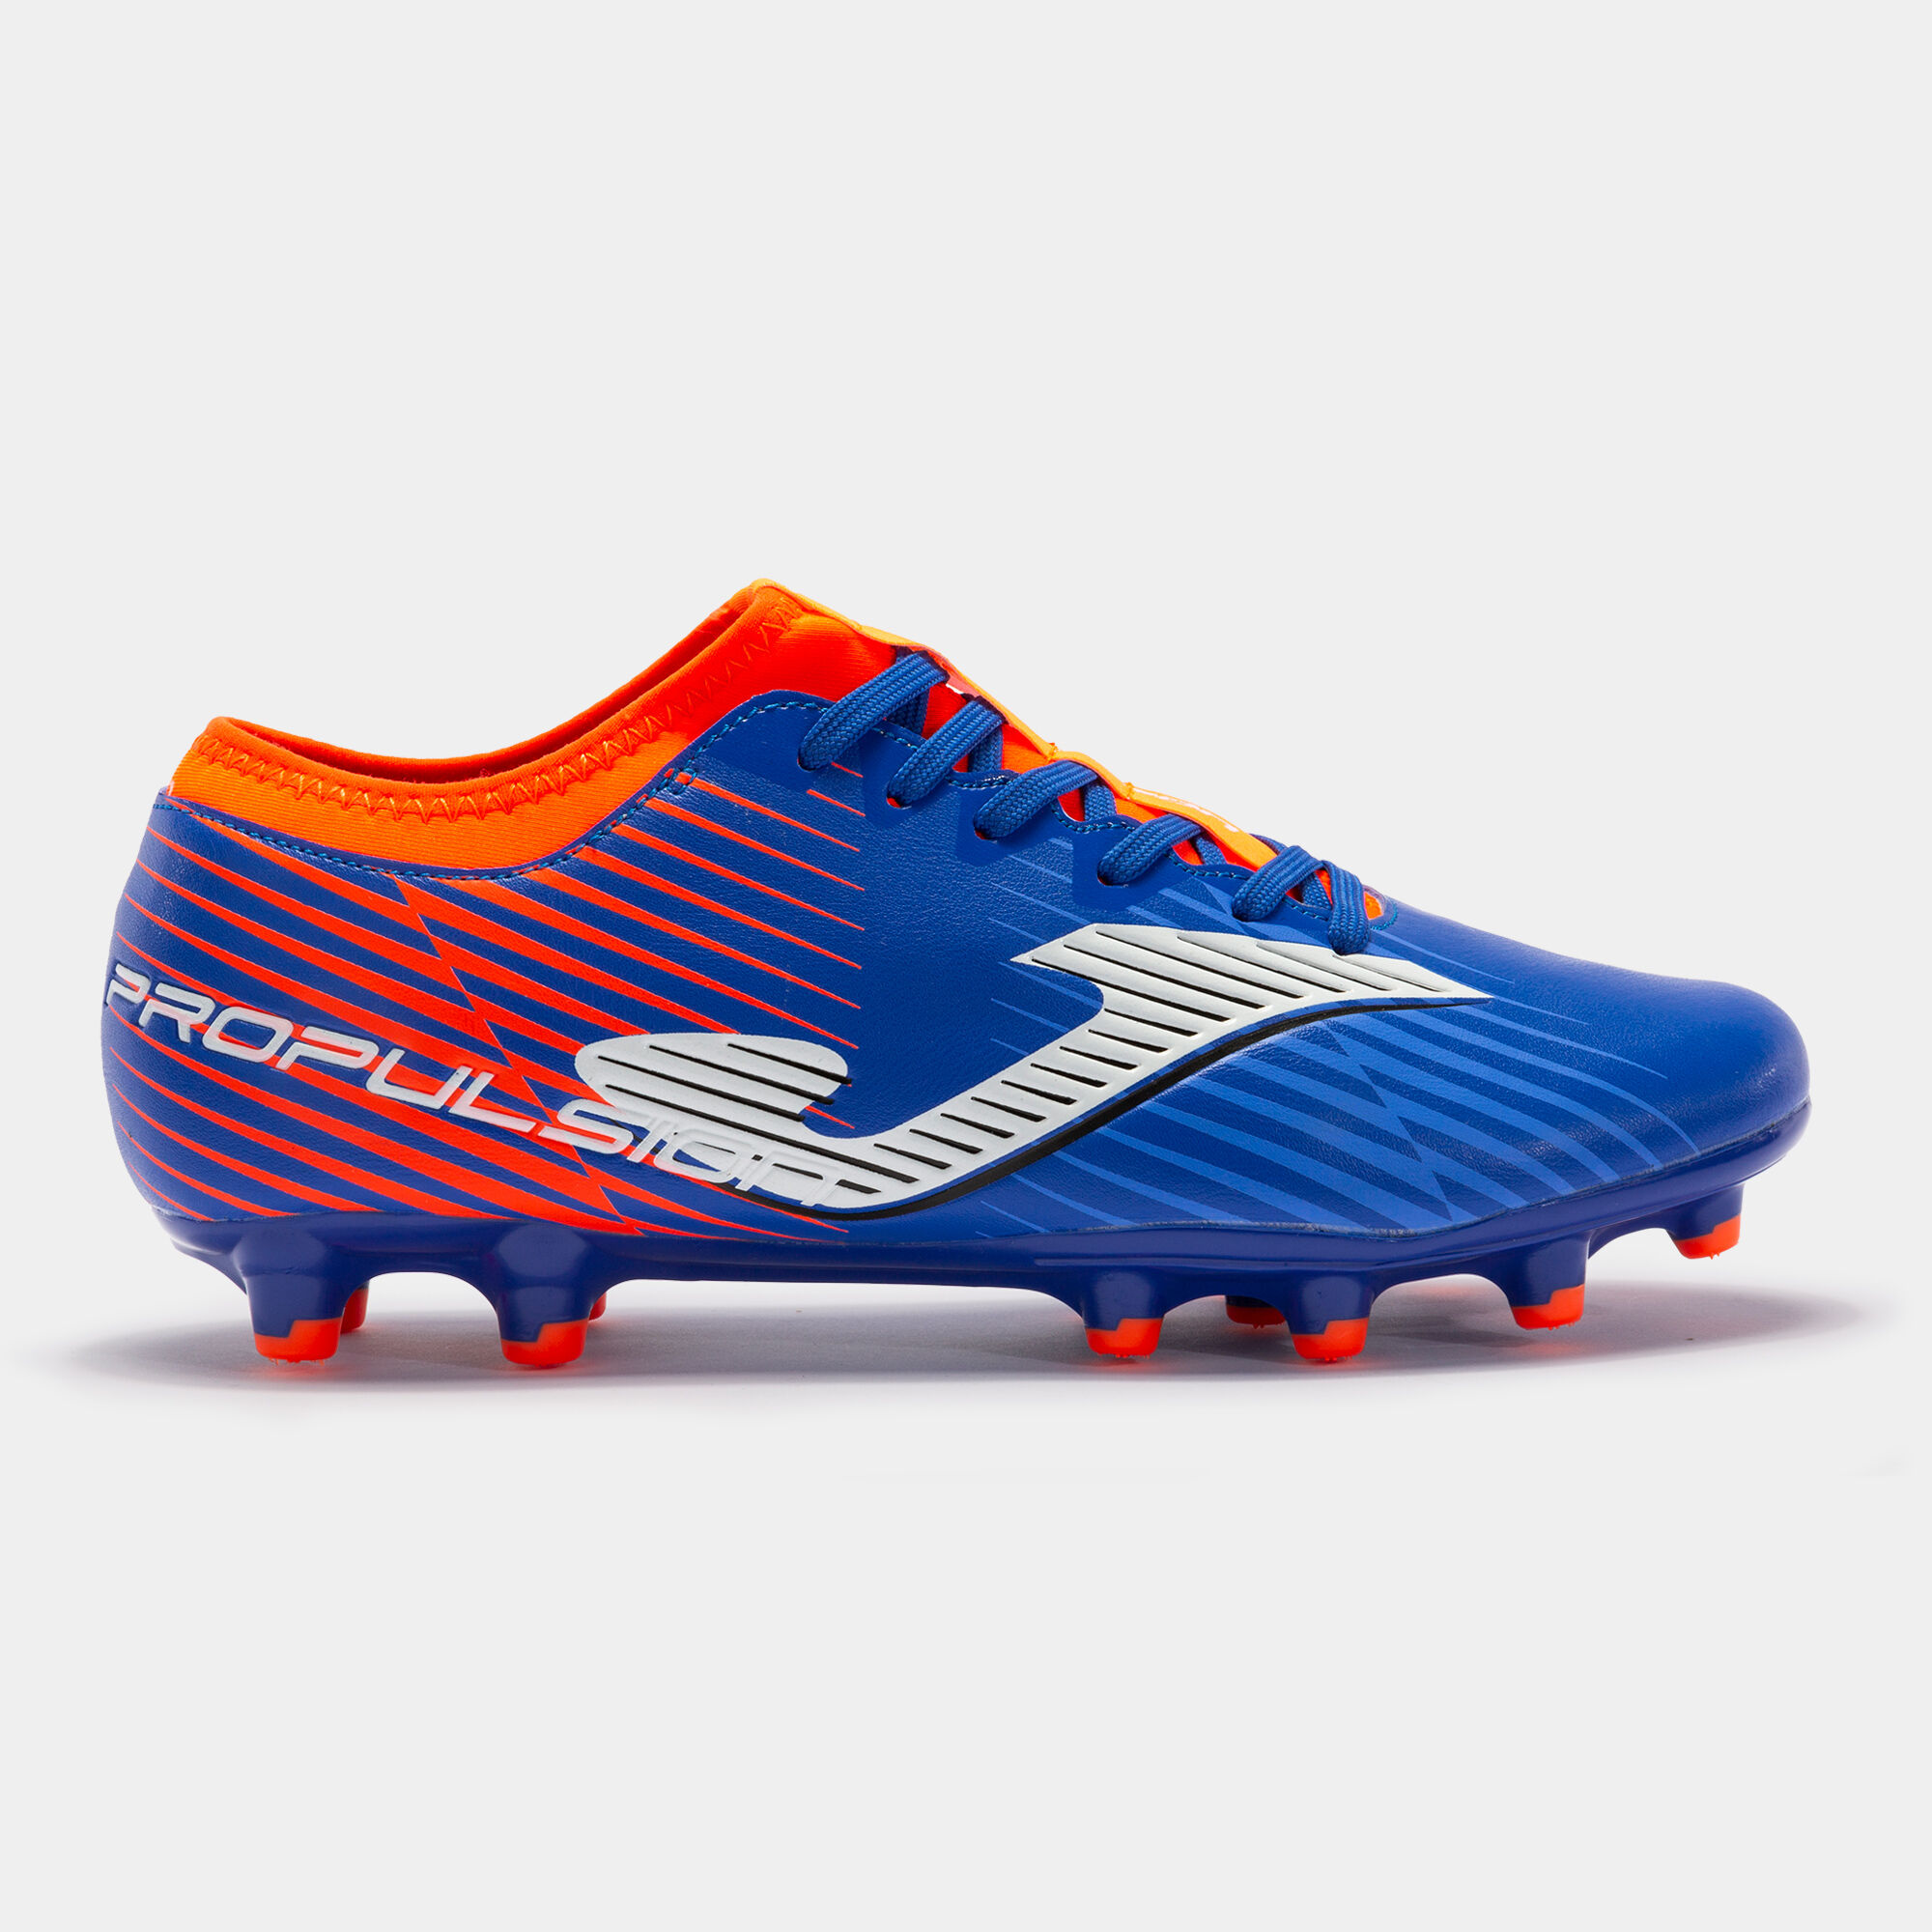 Football boots Propulsion Cup 23 firm ground FG royal blue fluorescent orange